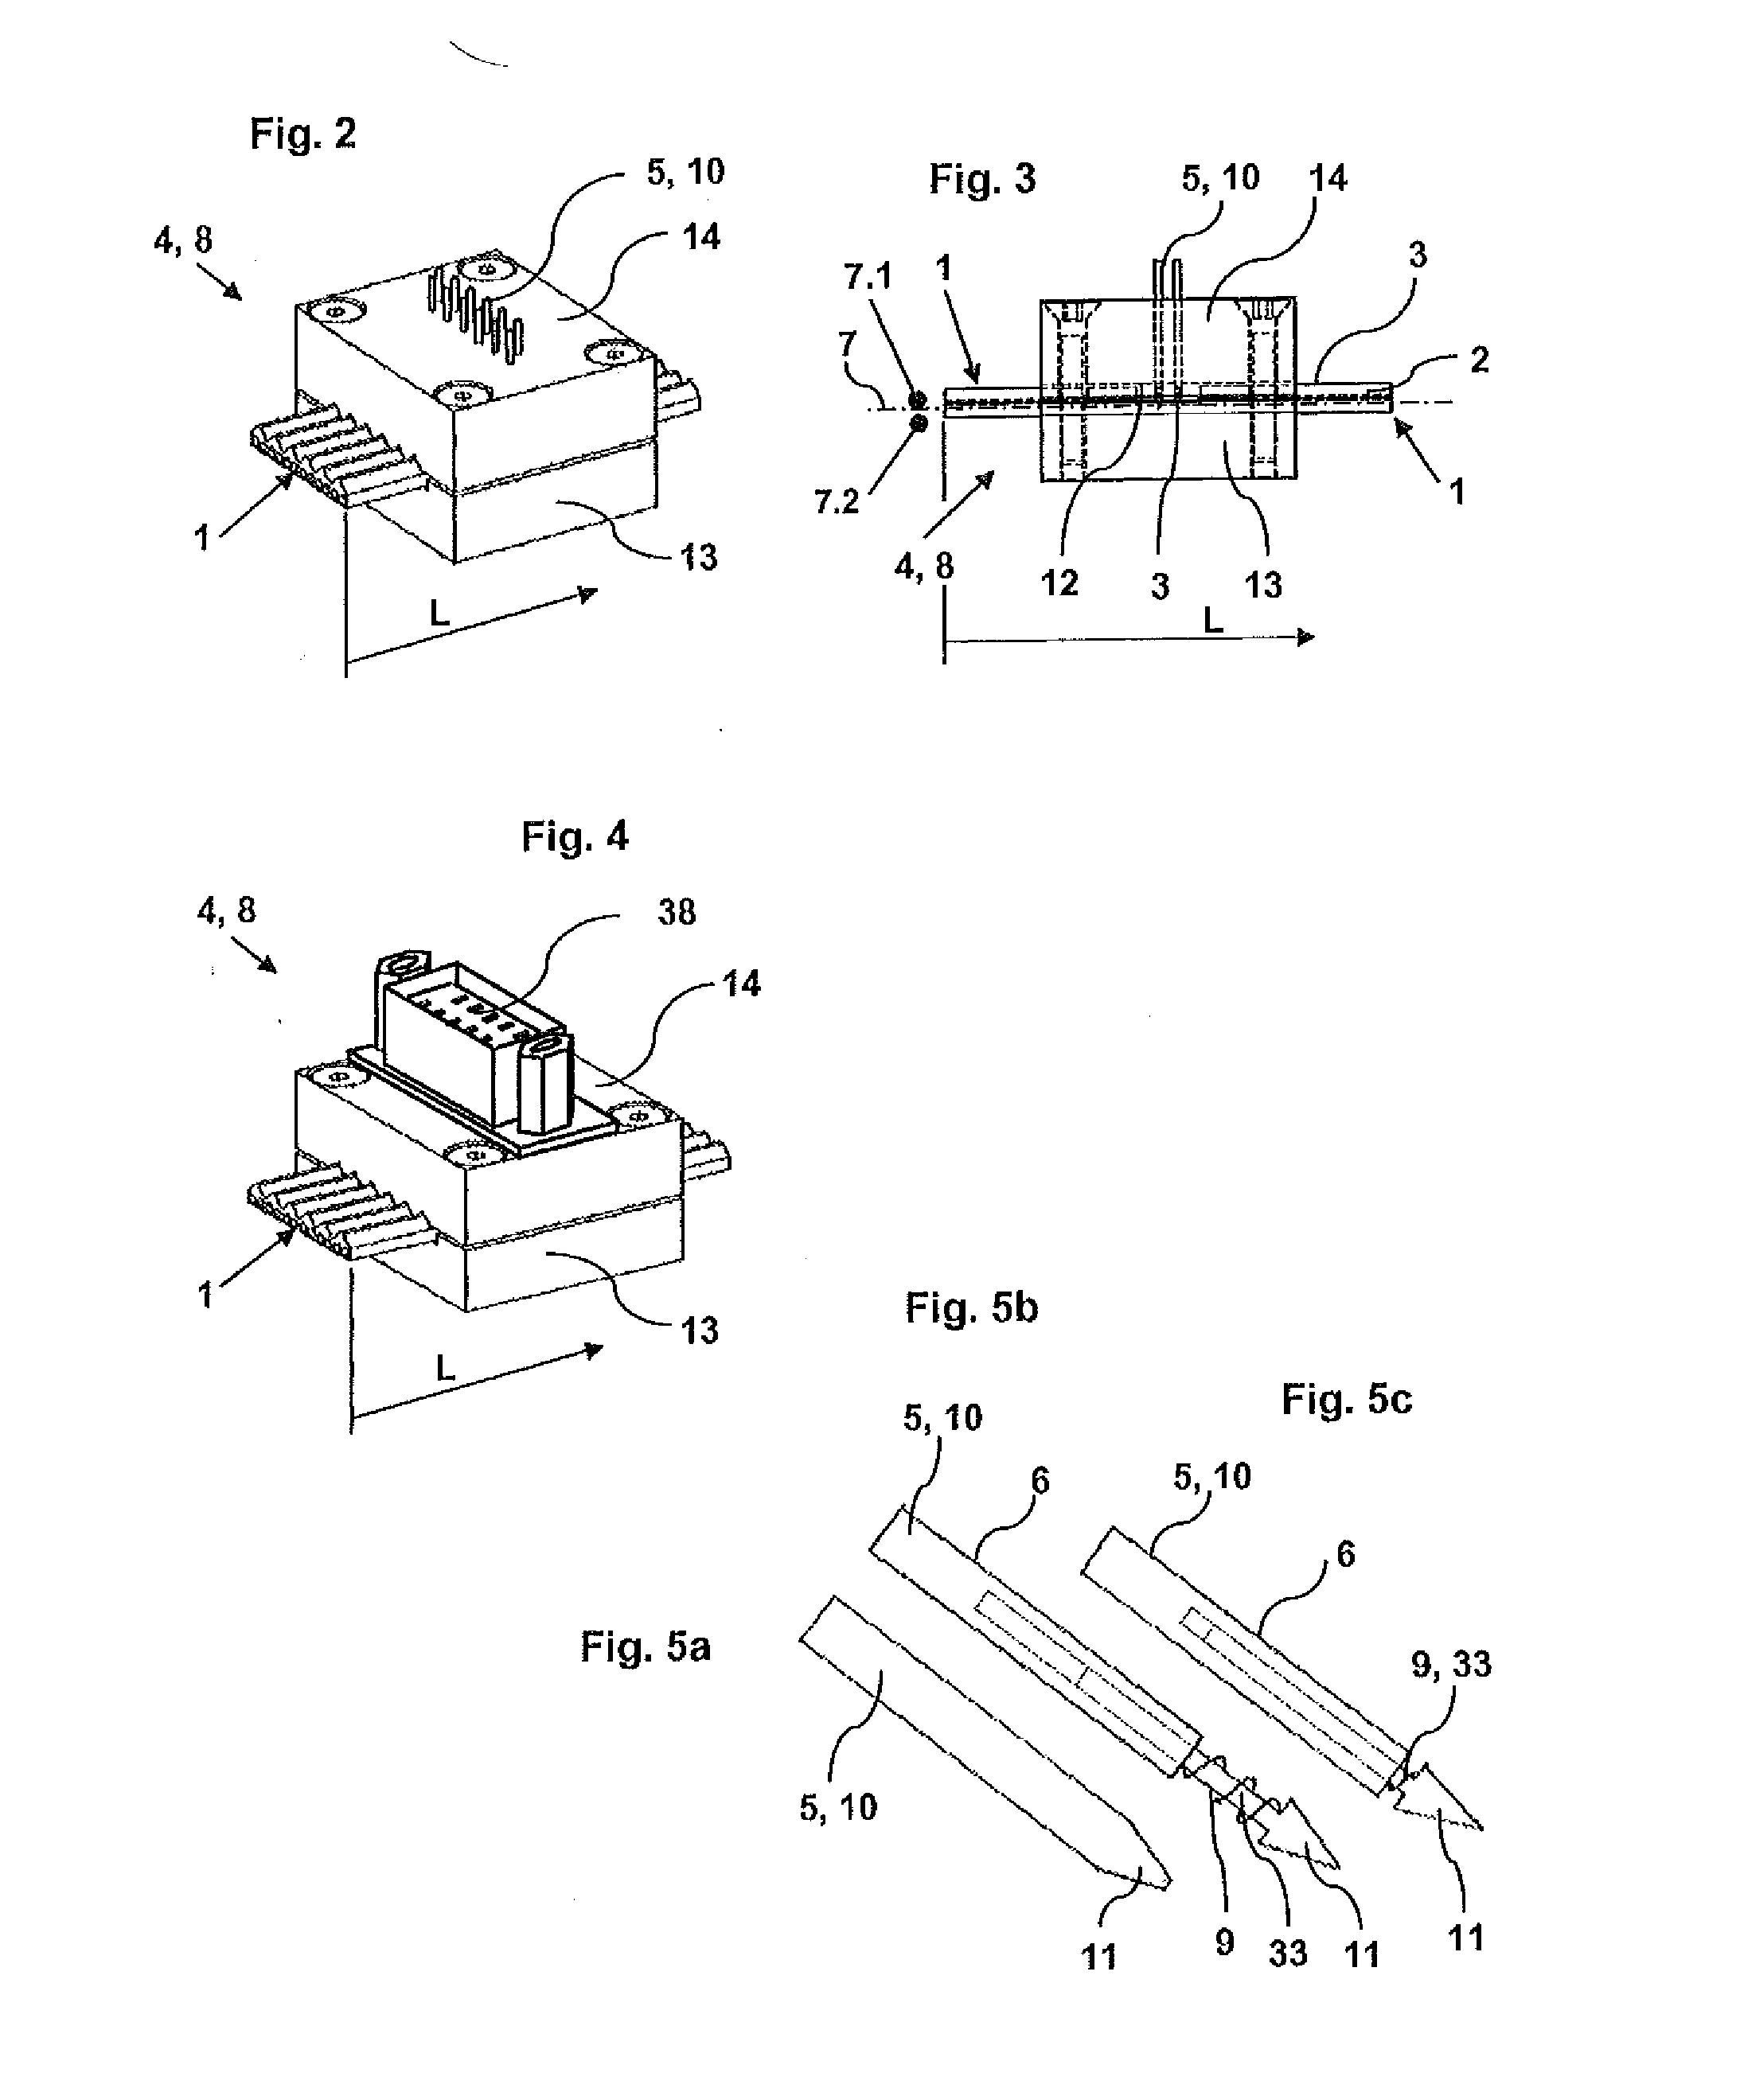 Load supporting belt